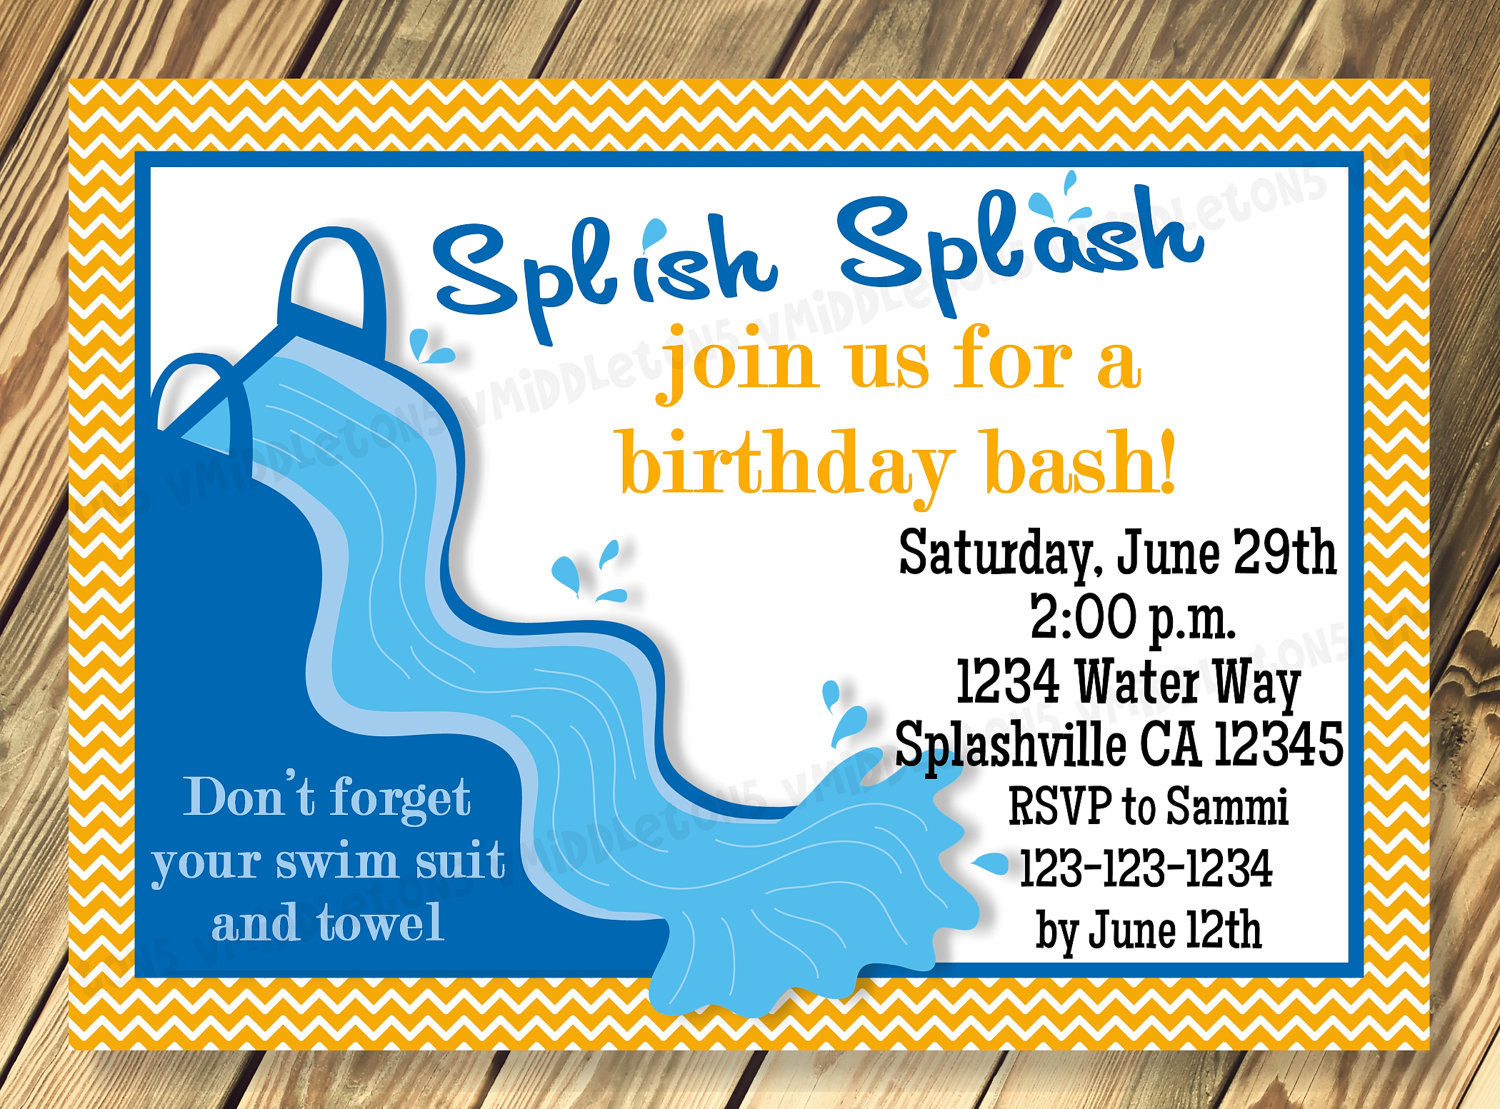 Water Slide Birthday Party Invitations
 Water Slide Birthday Party Invitation Print Your Own 5x7 or